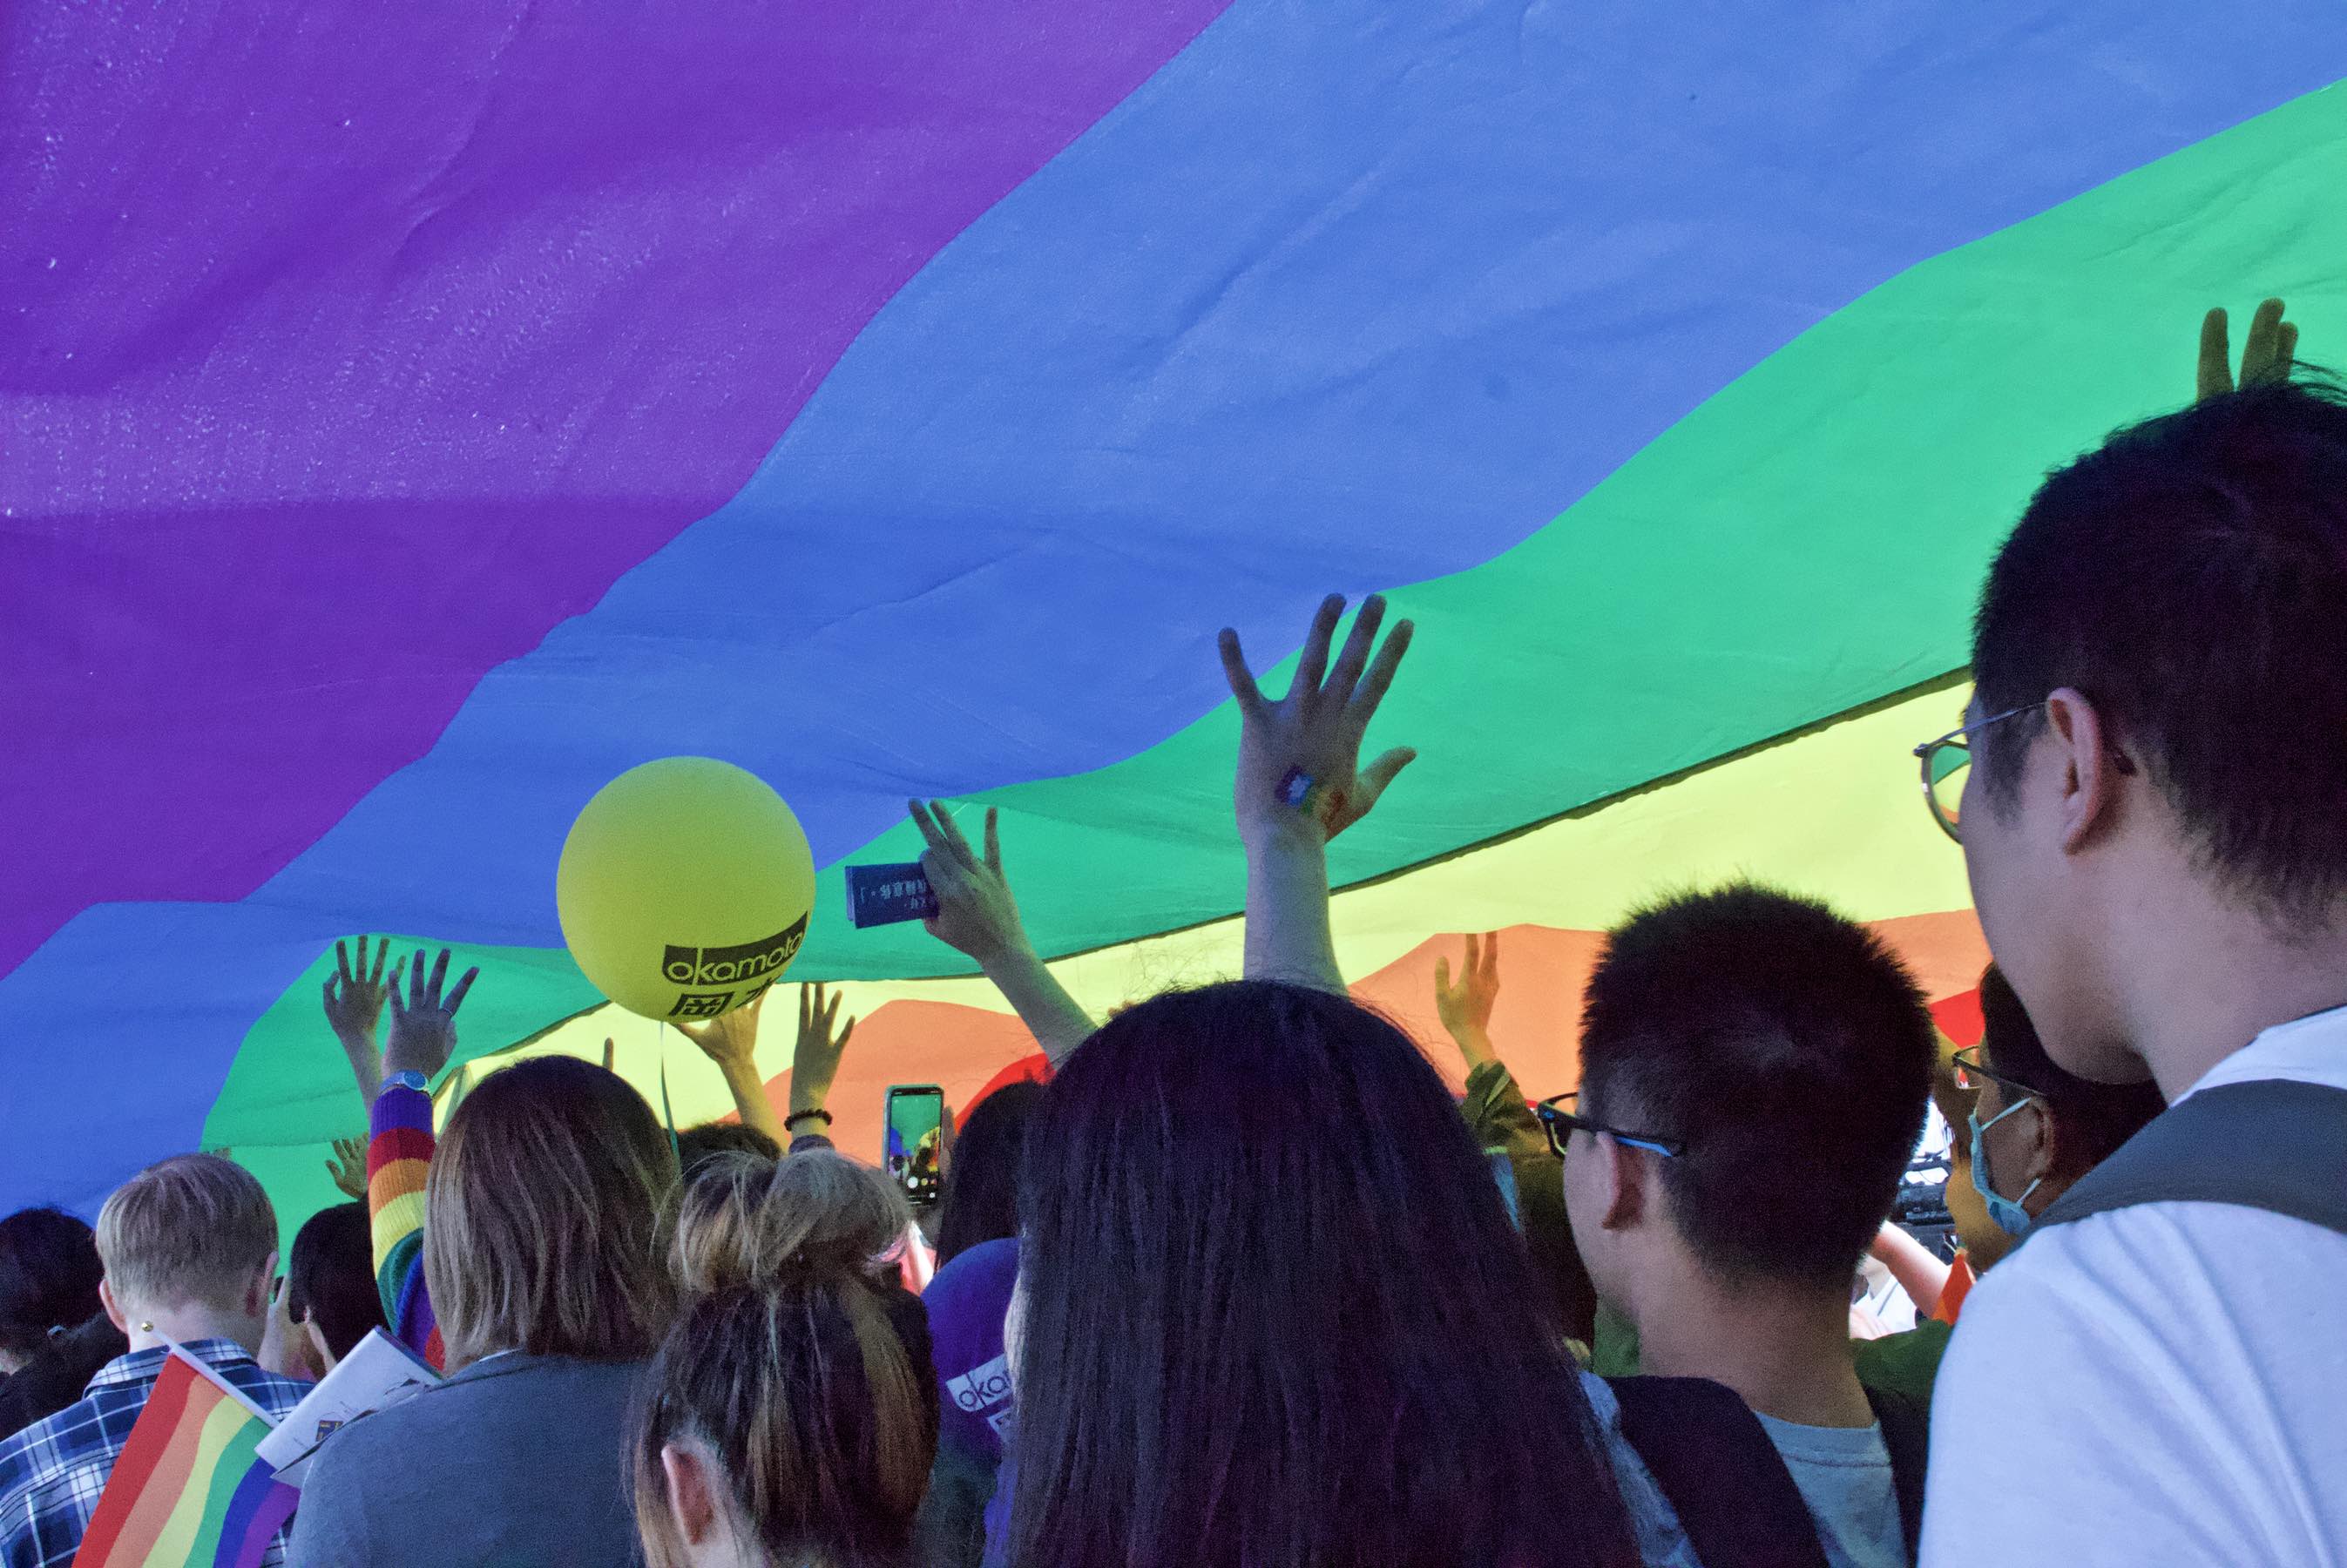 Thousands attended a rally in support of the city’s LGBT community last year. Photo via Coconuts Media